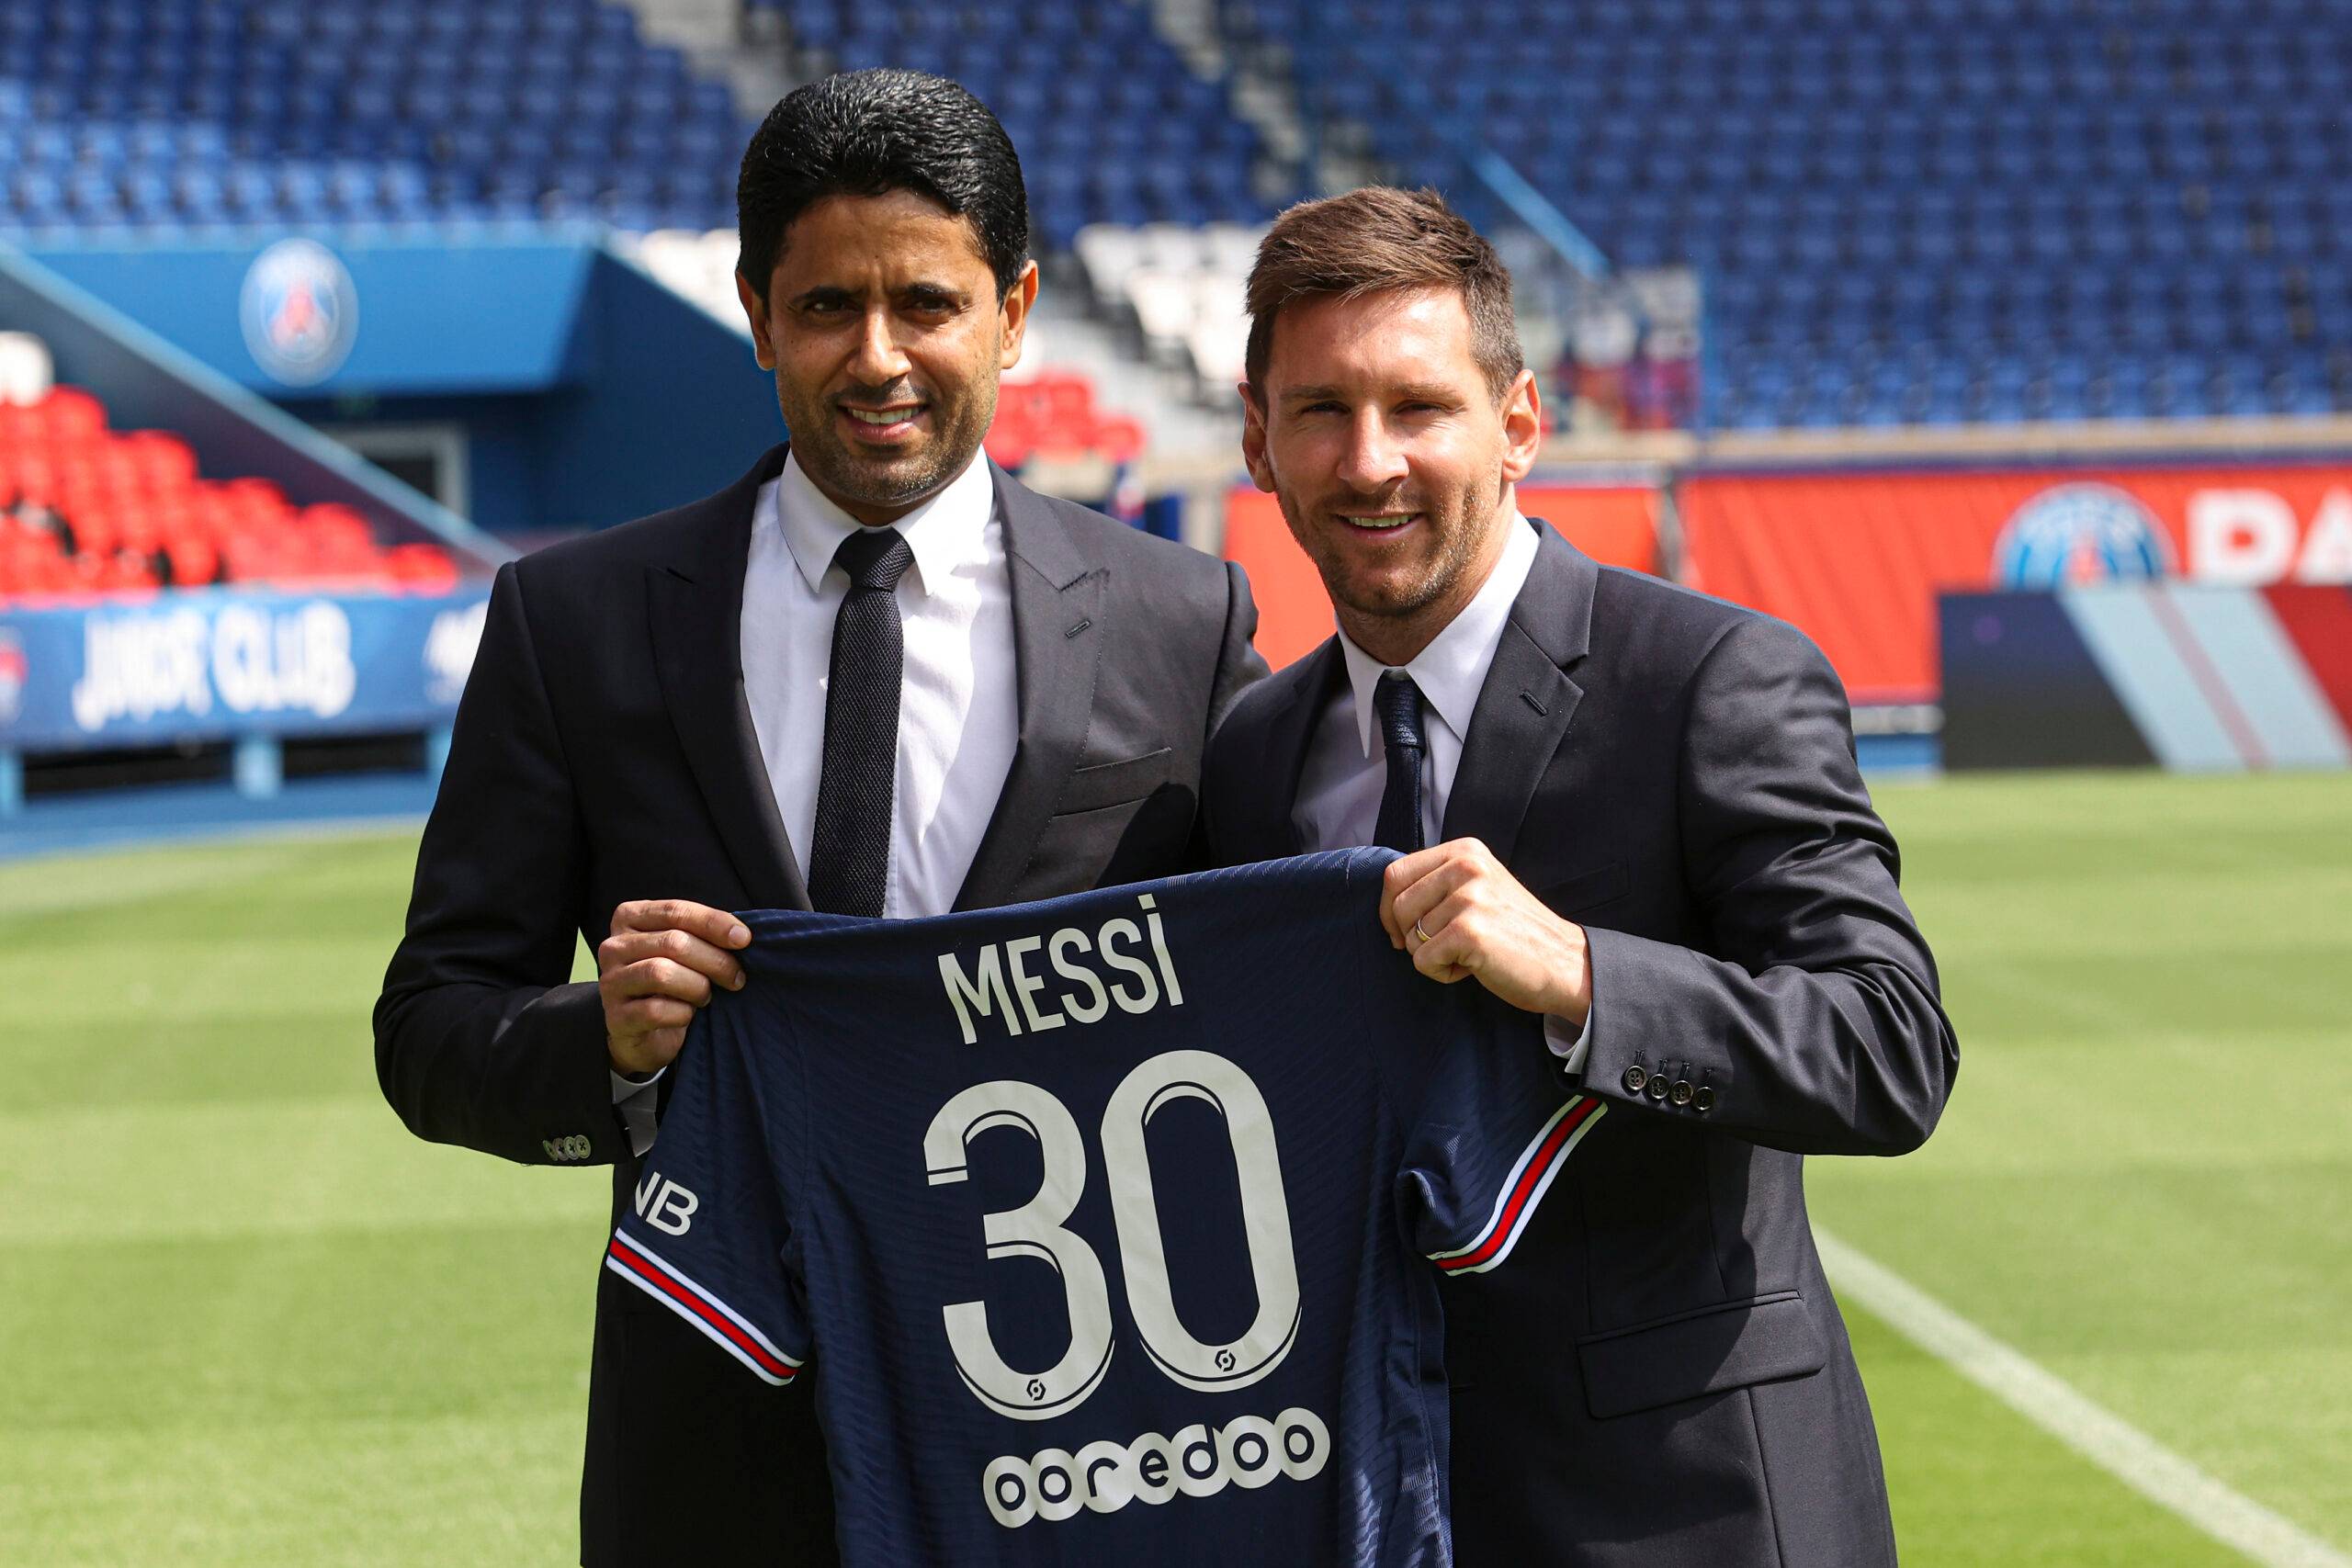 Messi signs with PSG